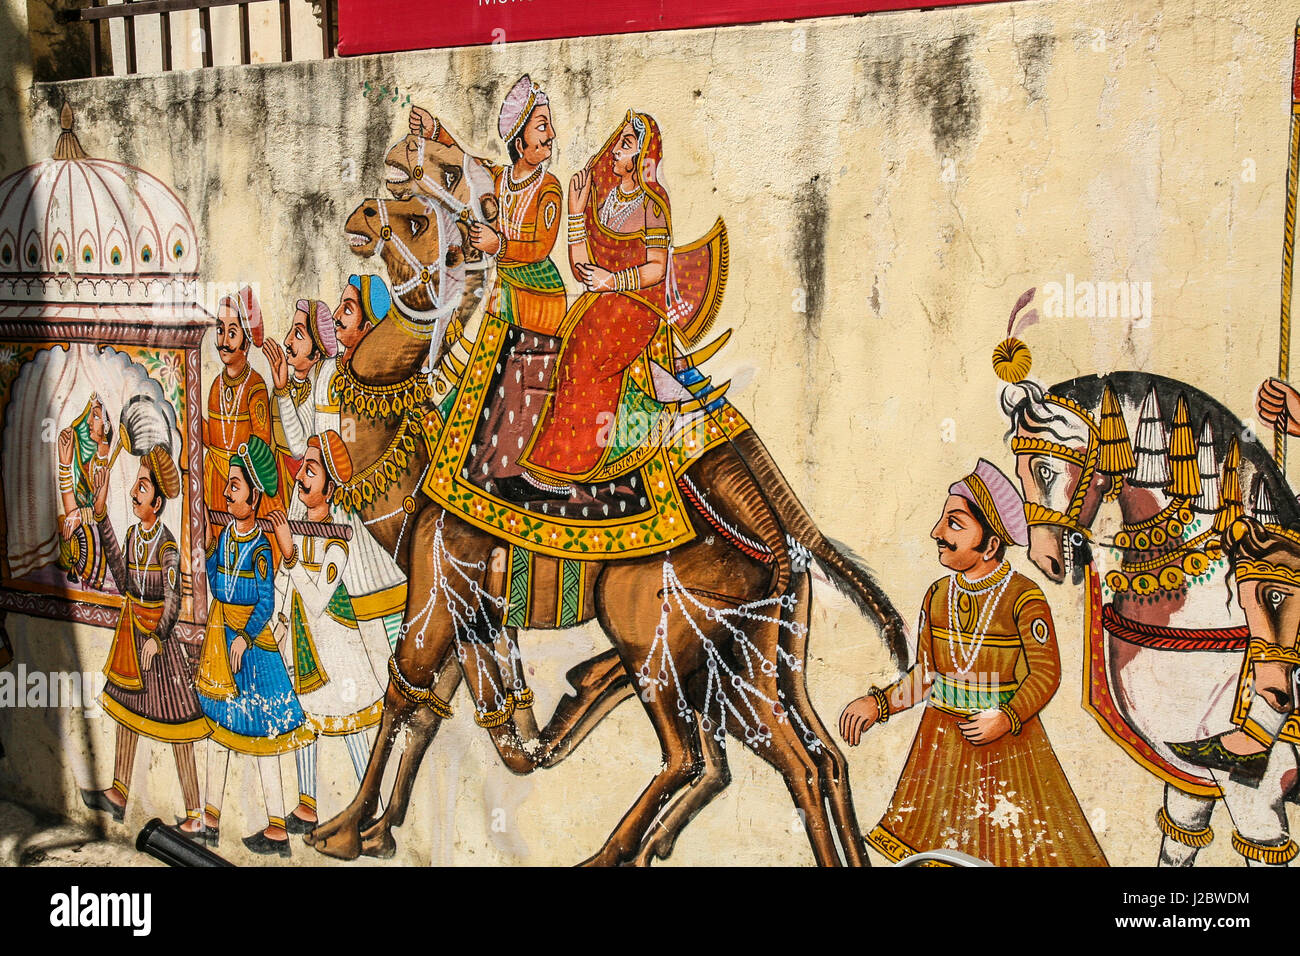 Udaipur, Rajasthan, India. Painted relief of Mughals riding camels and horses with a Howdaw Stock Photo